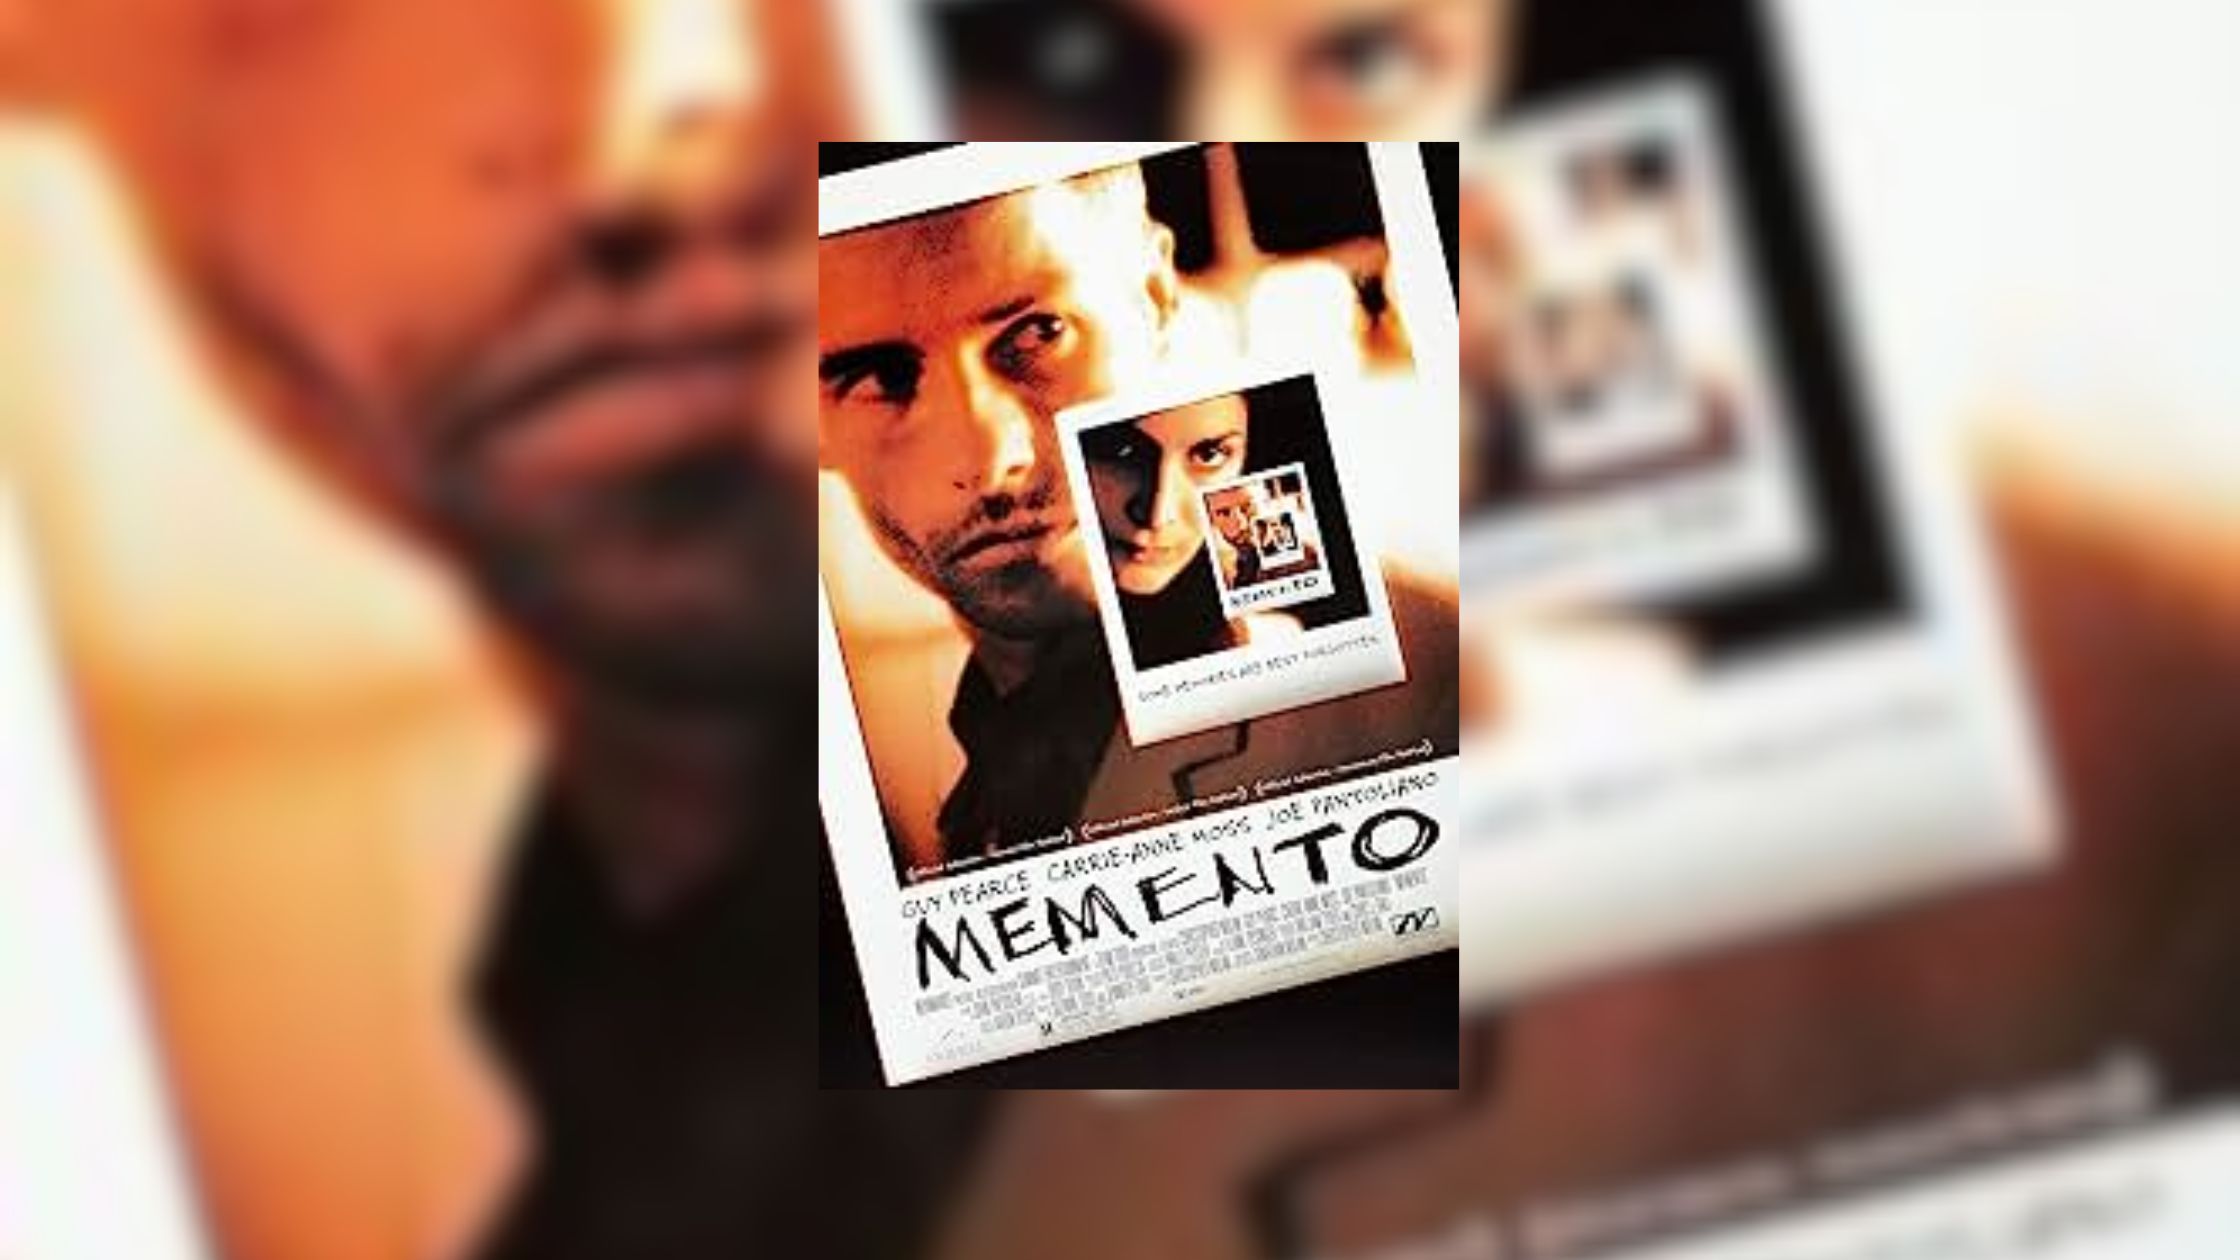 Poster image of the film Memento released in the year 2000.